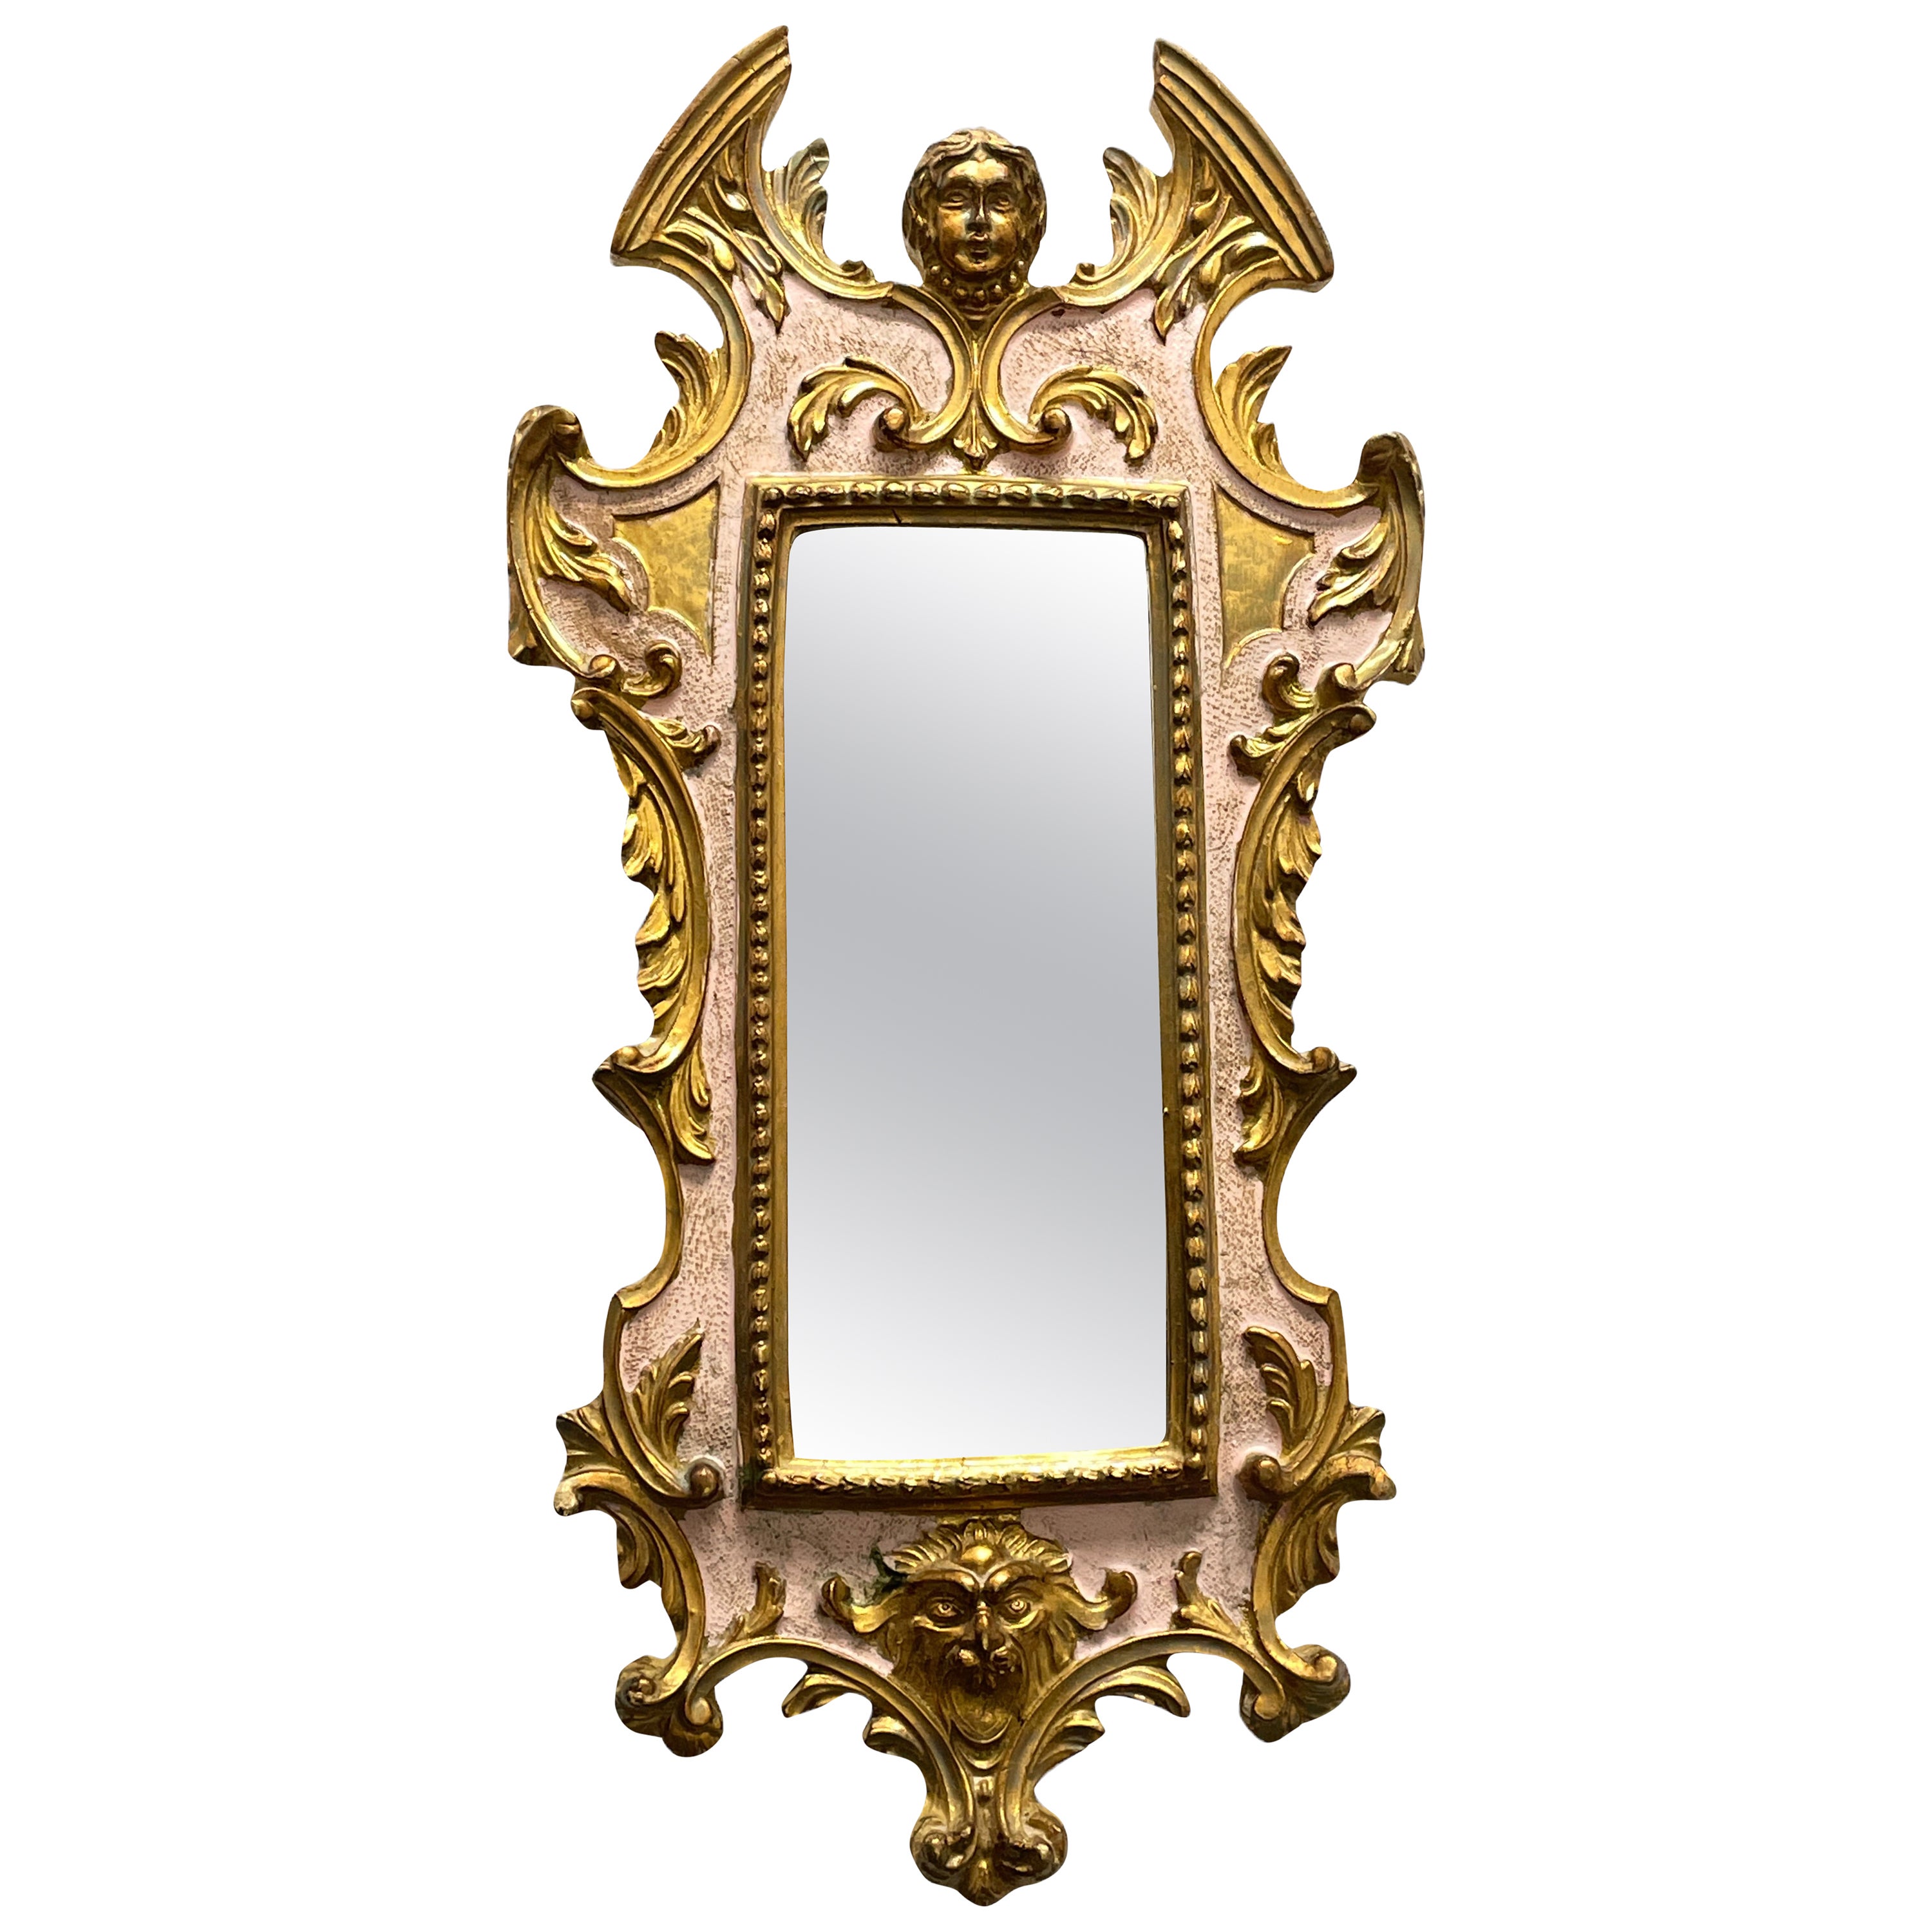 Beautiful Stunning Ornate Tole Toleware Gilded Frame Mirror, Italy Antique 1900s For Sale